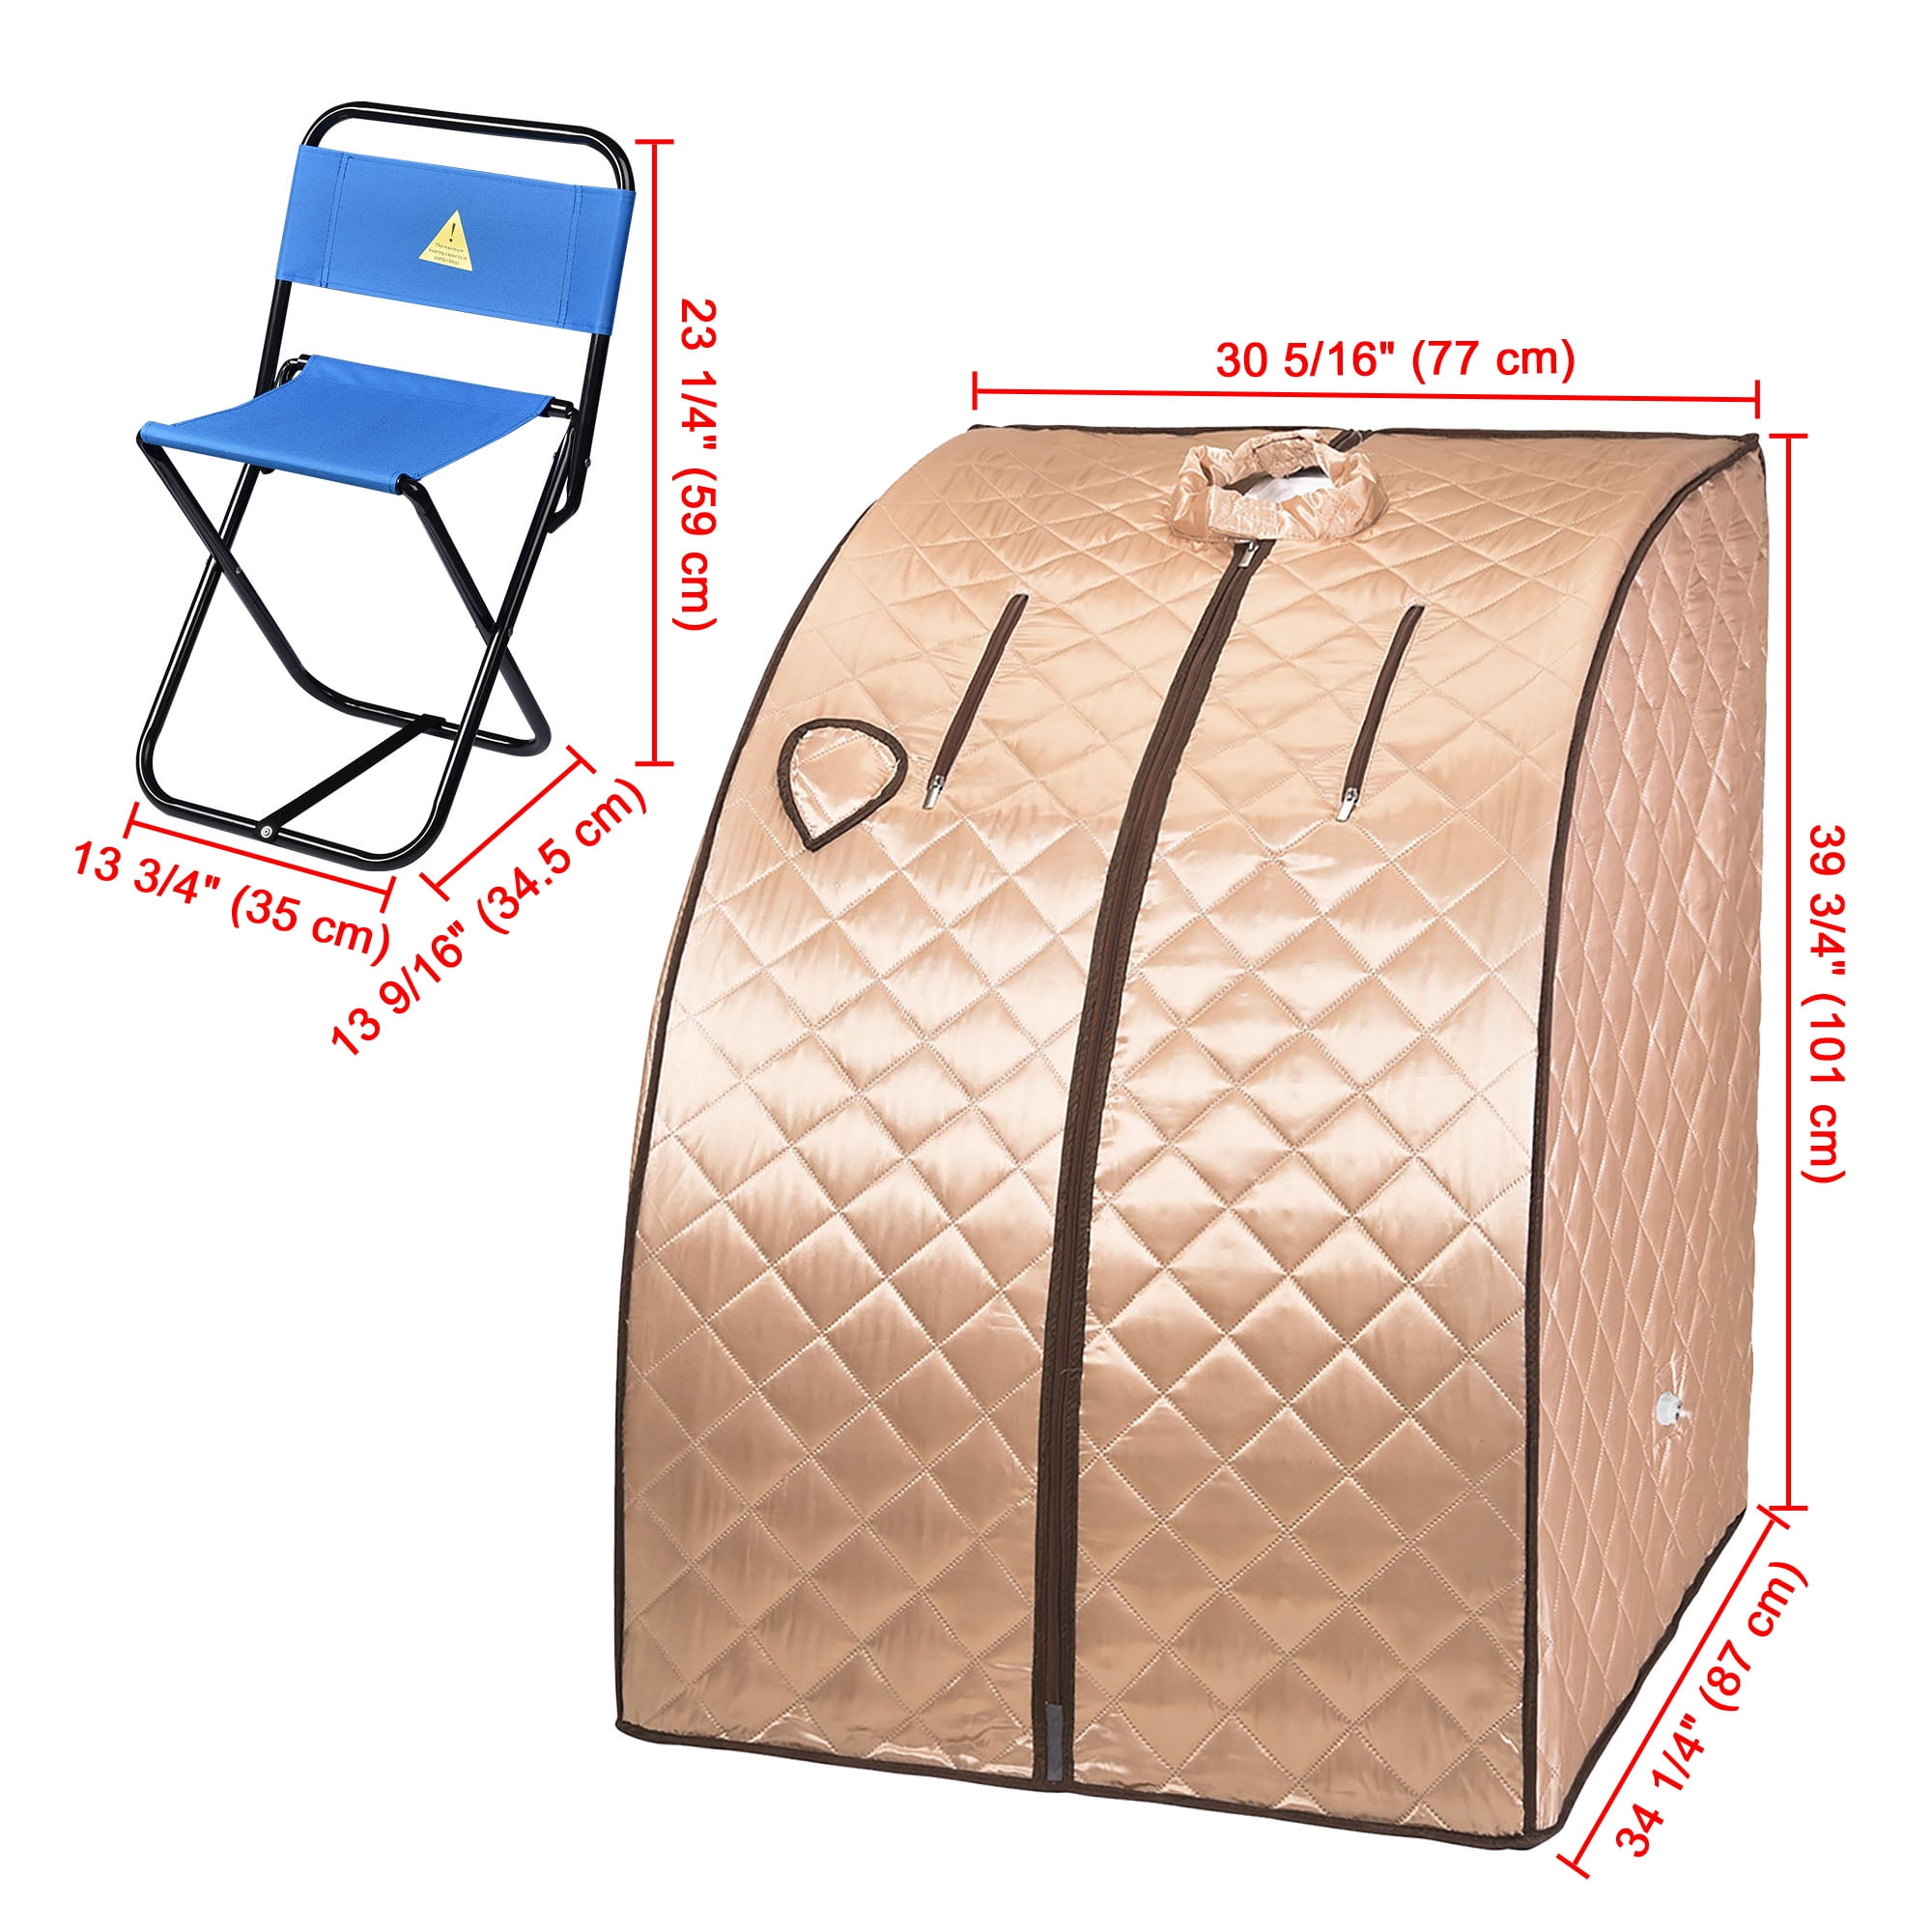 Details about   2L Portable Folding Steam Sauna SPA Loss Weight Detox Therapy Body slim b e 341 